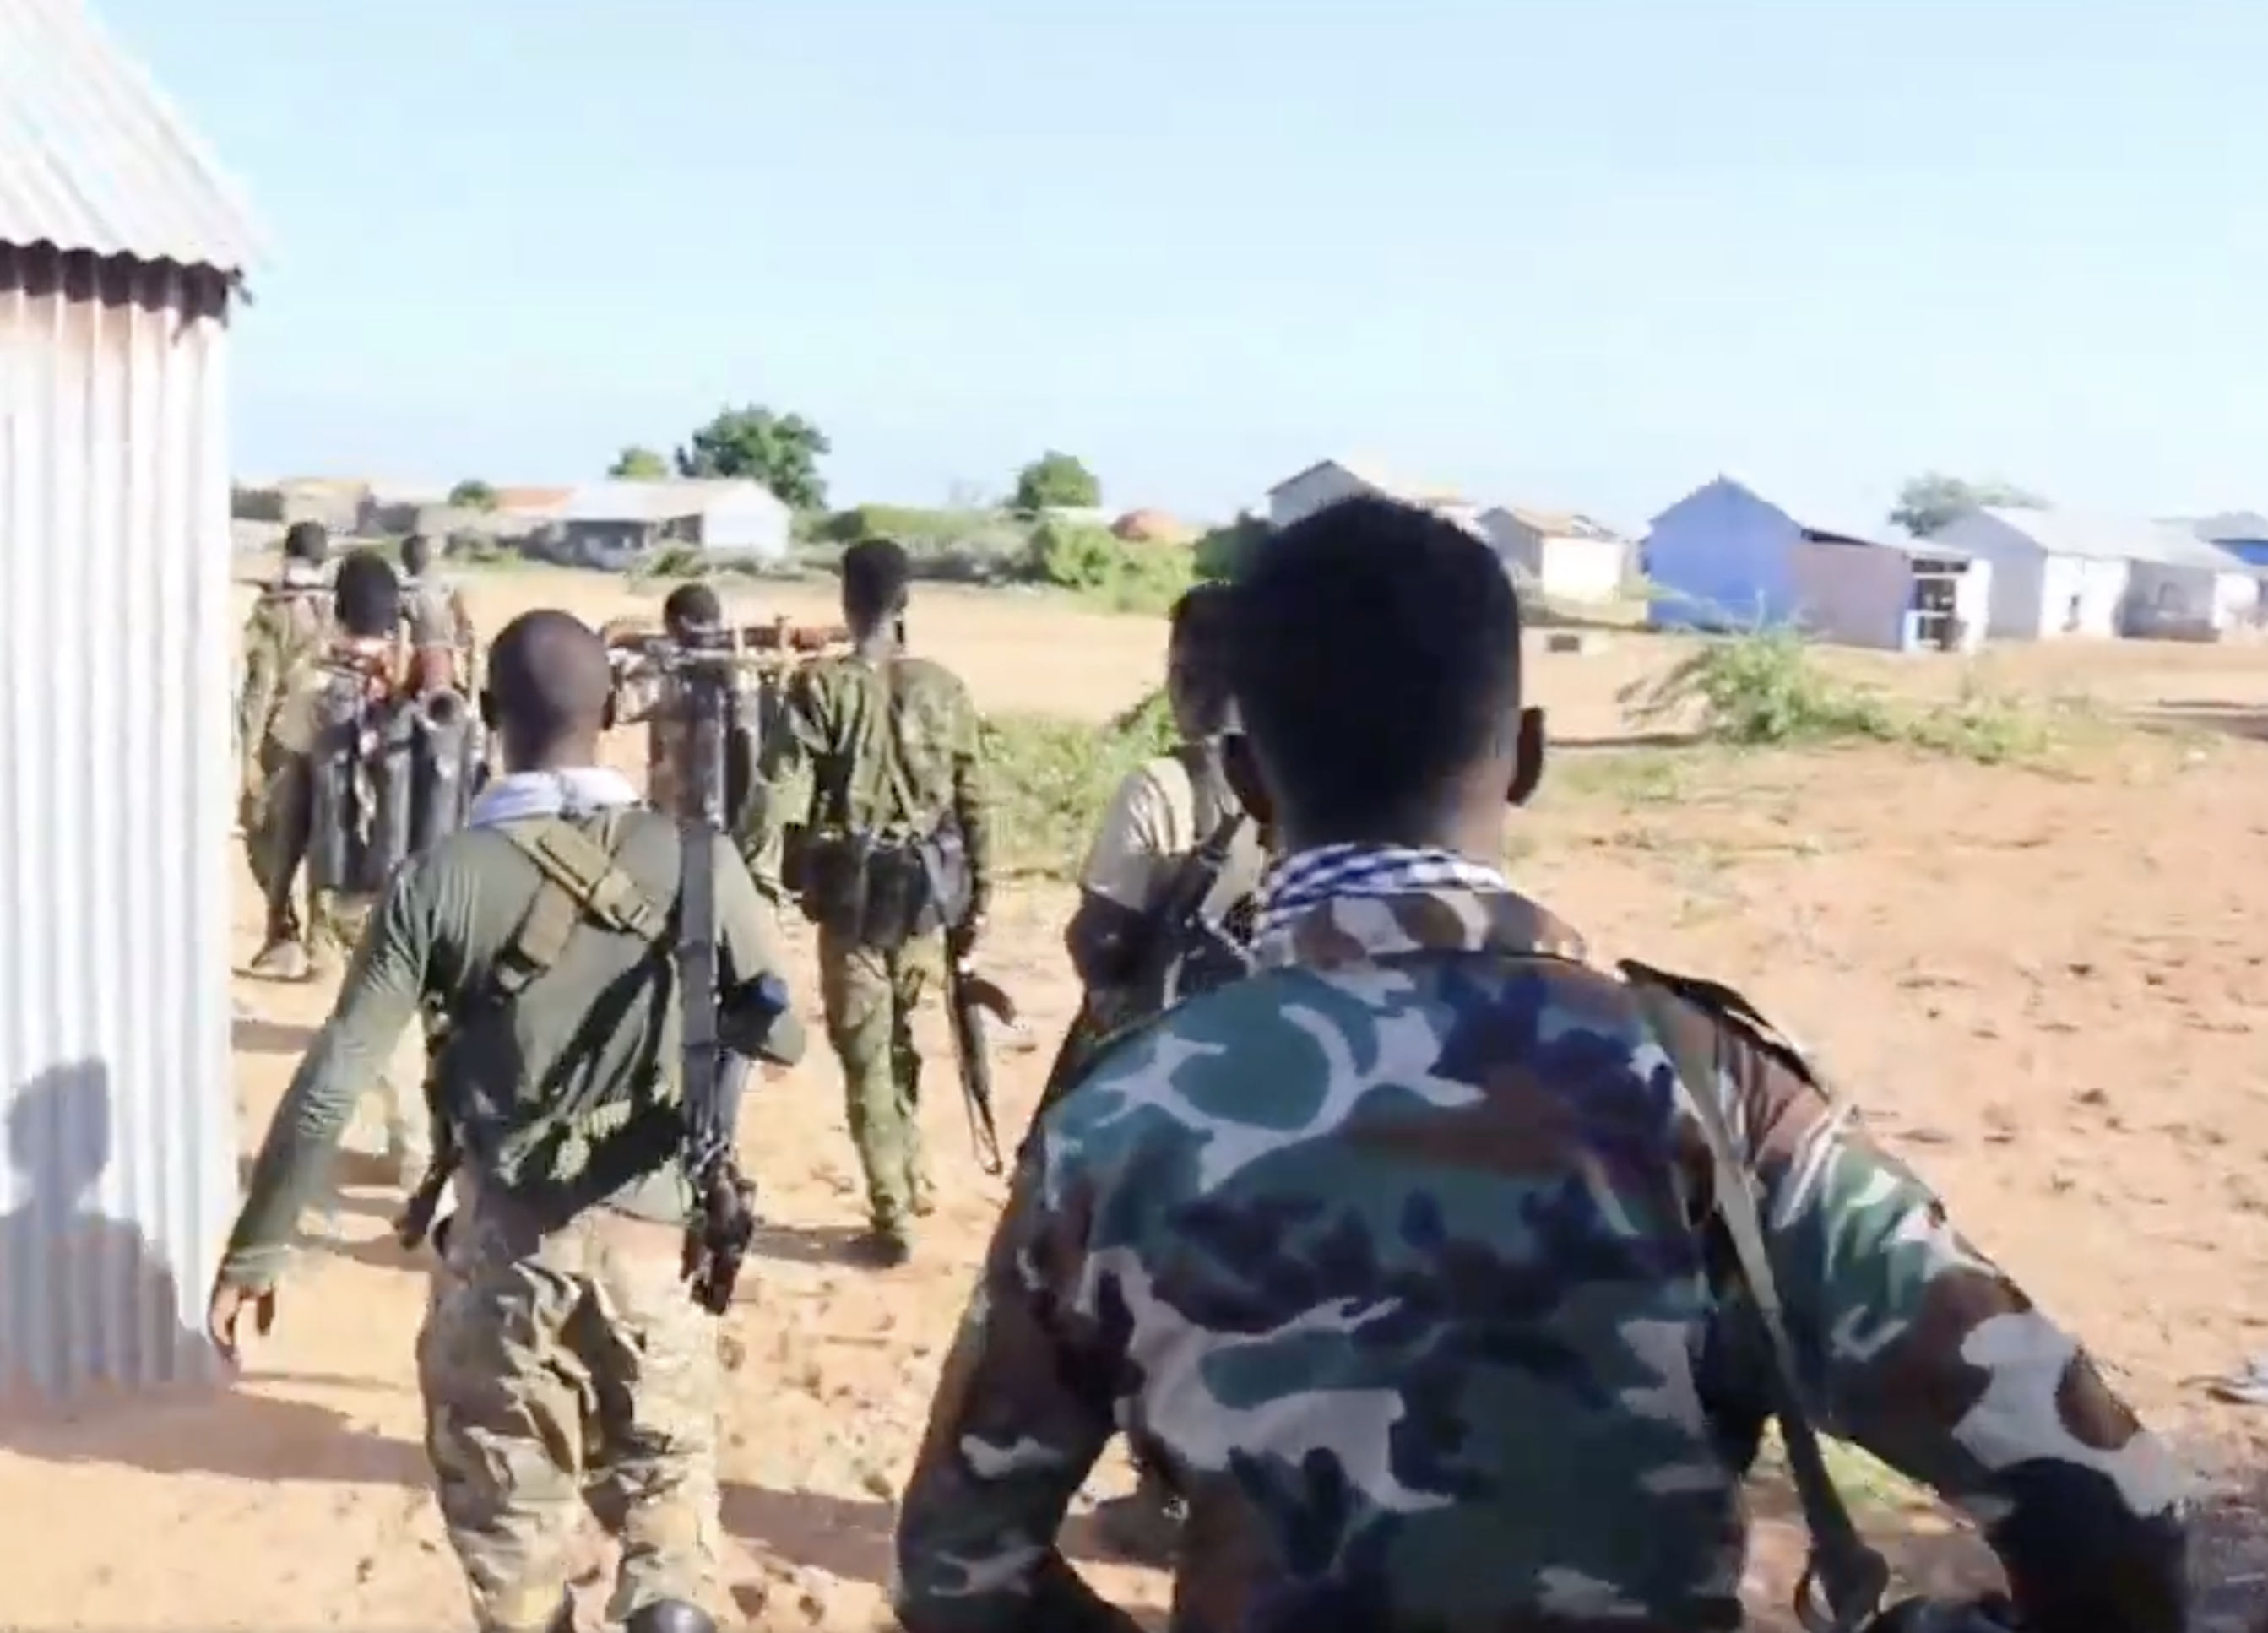 Government forces and local fighters seized Masagaway from Al-Shabaab